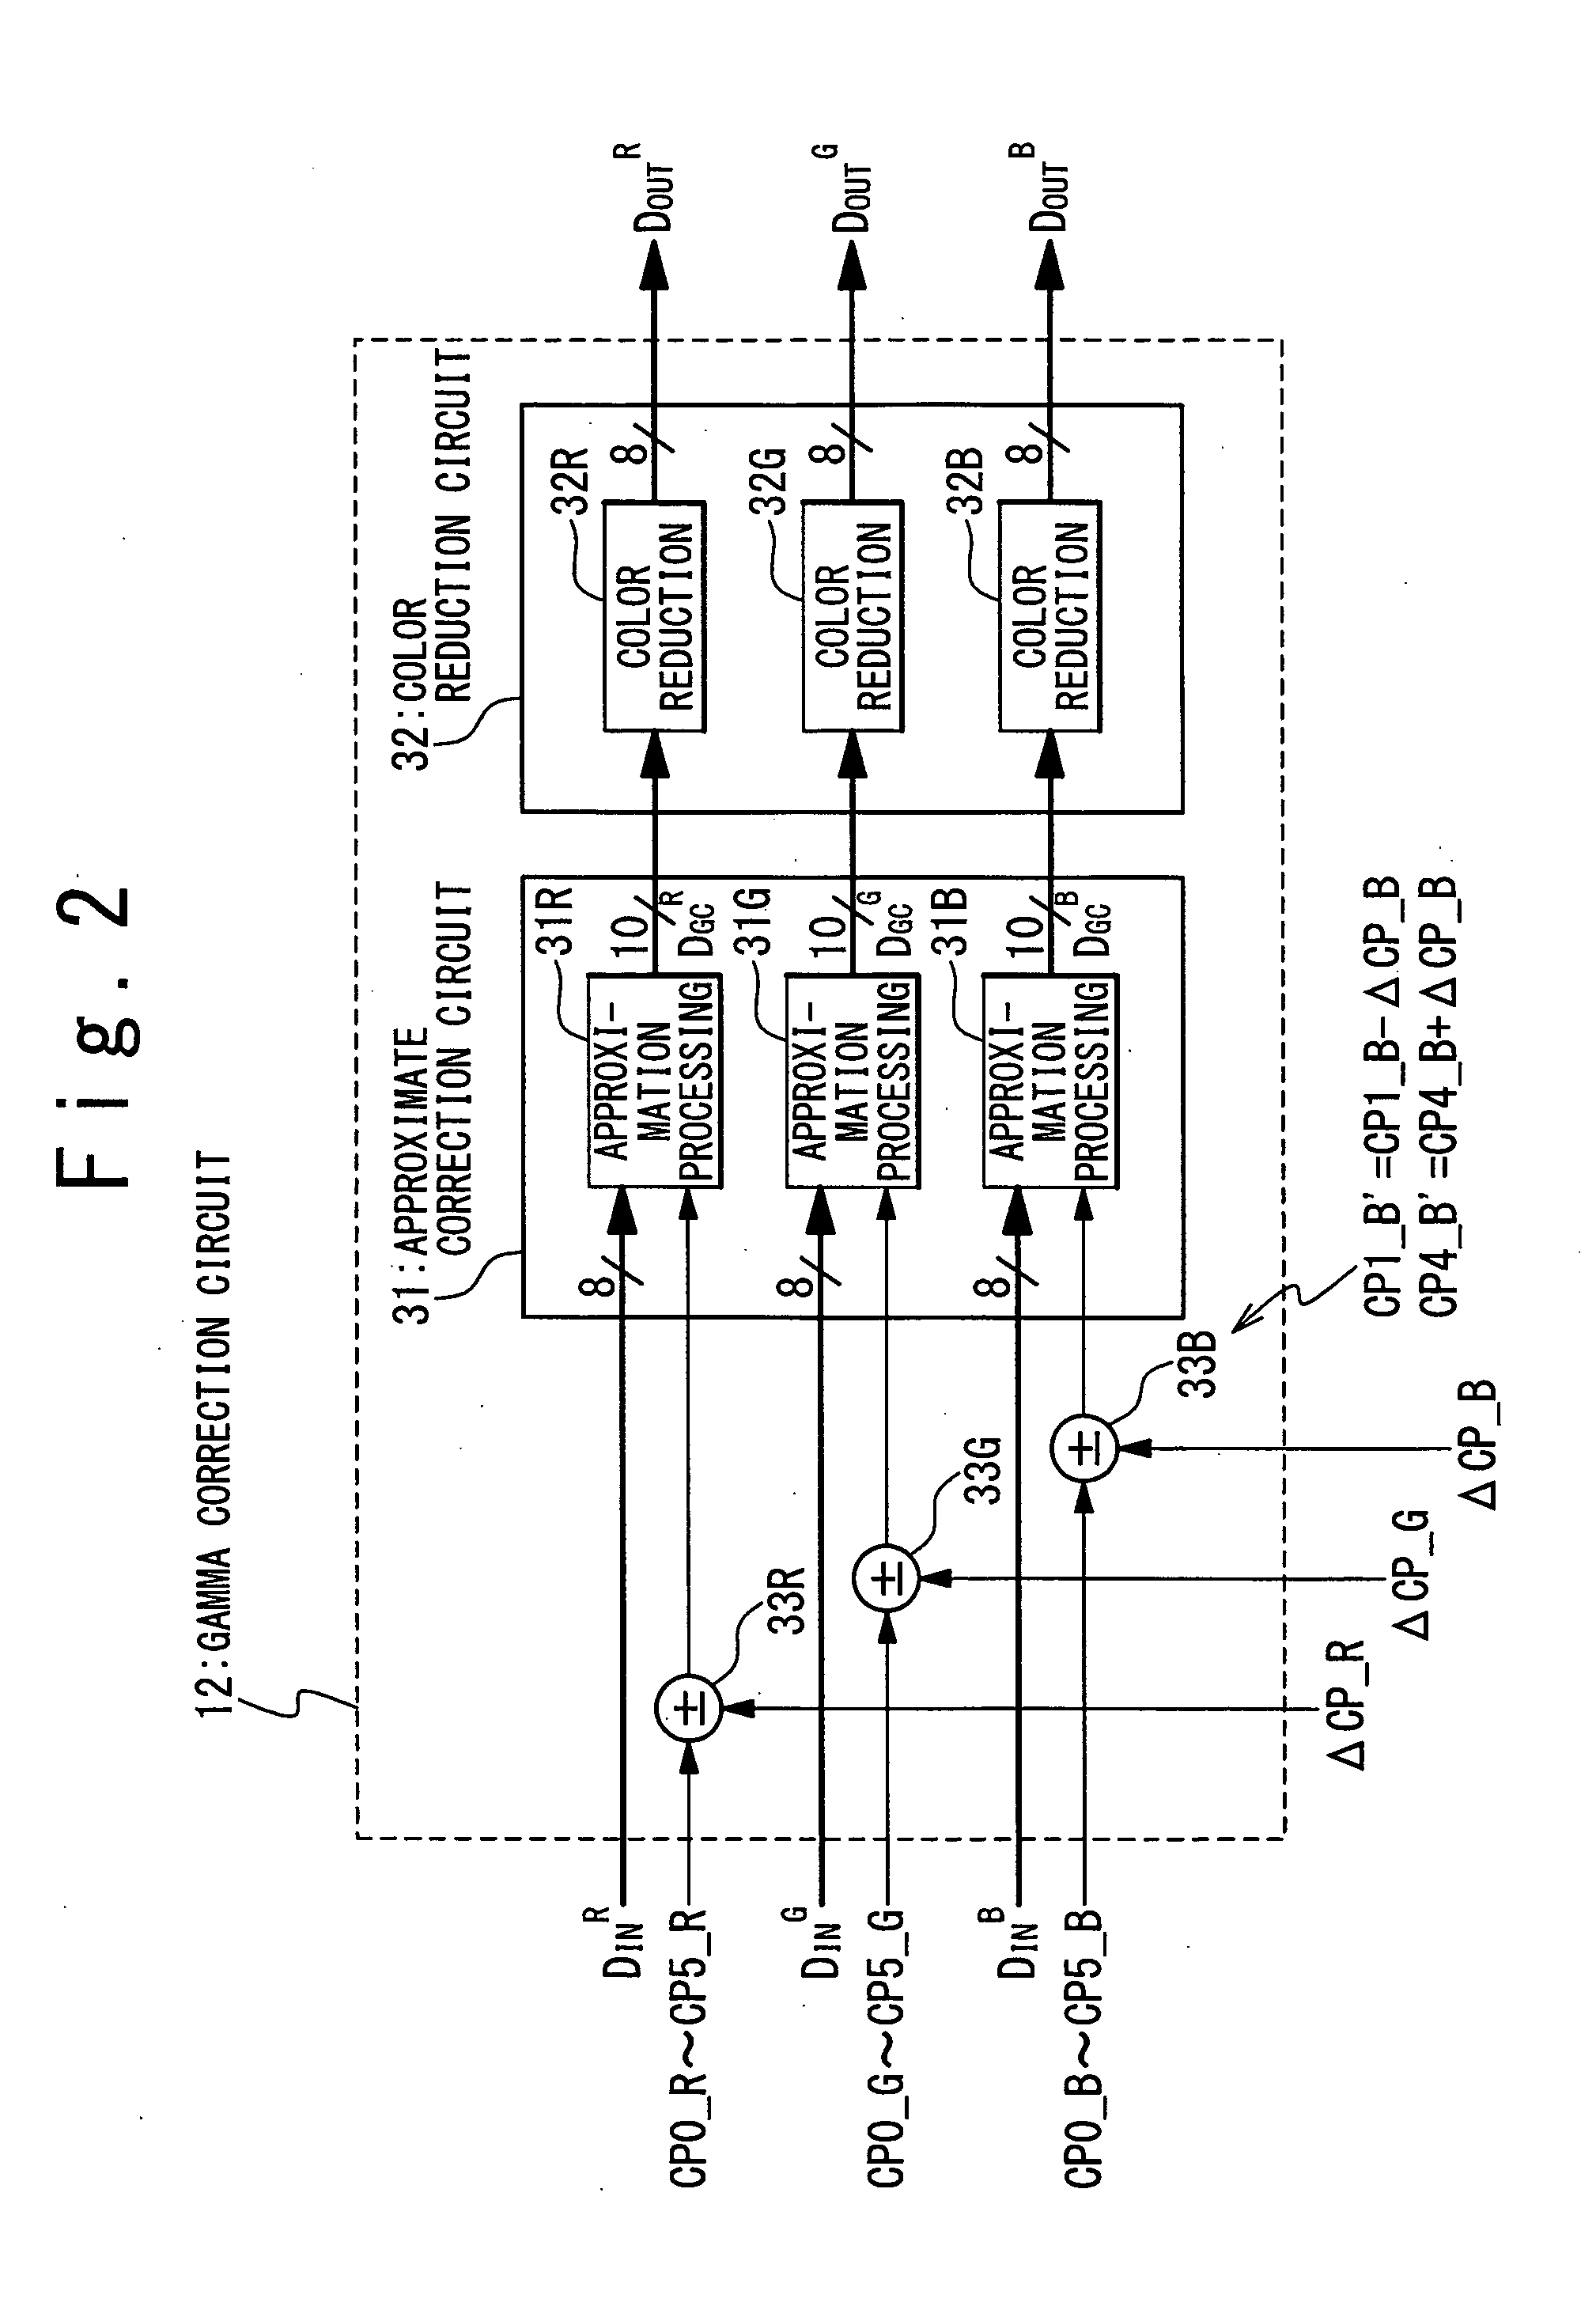 Apparatus for simultaneously performing gamma correction and contrast enhancement in display device